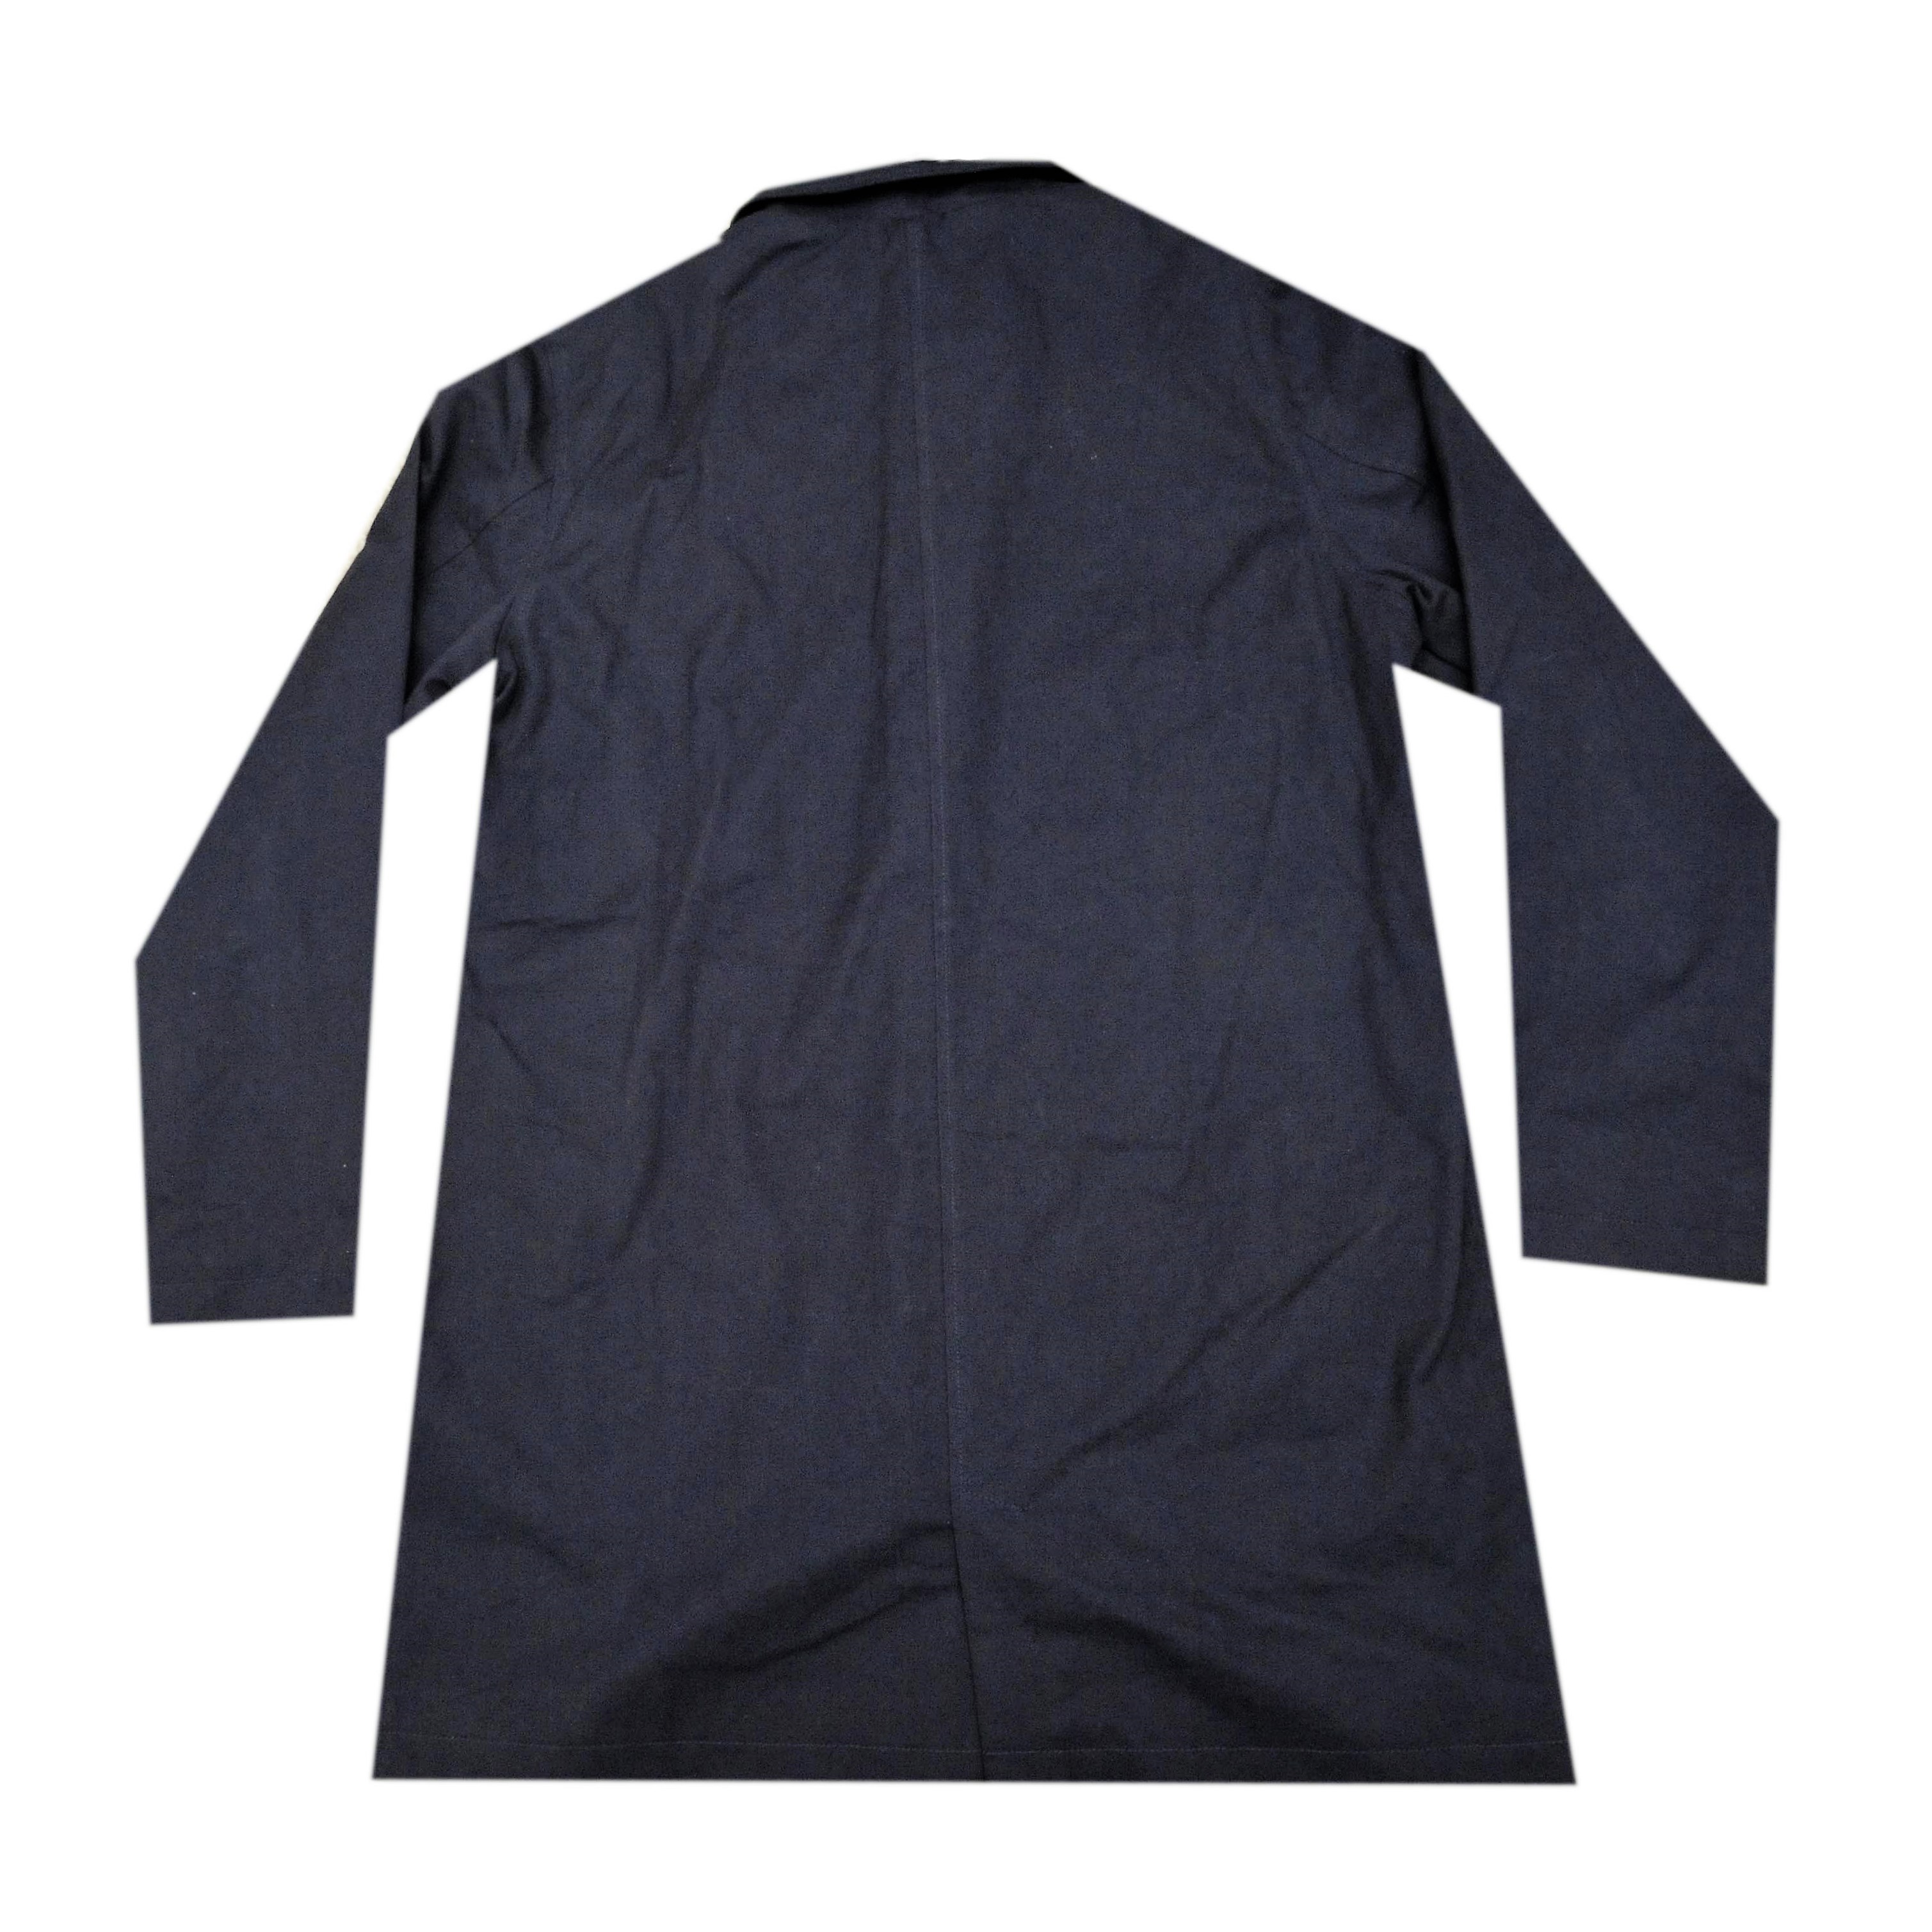 Outerwear - Single Breasted Mac in Navy Cotton by Armor Lux - Pellicano ...